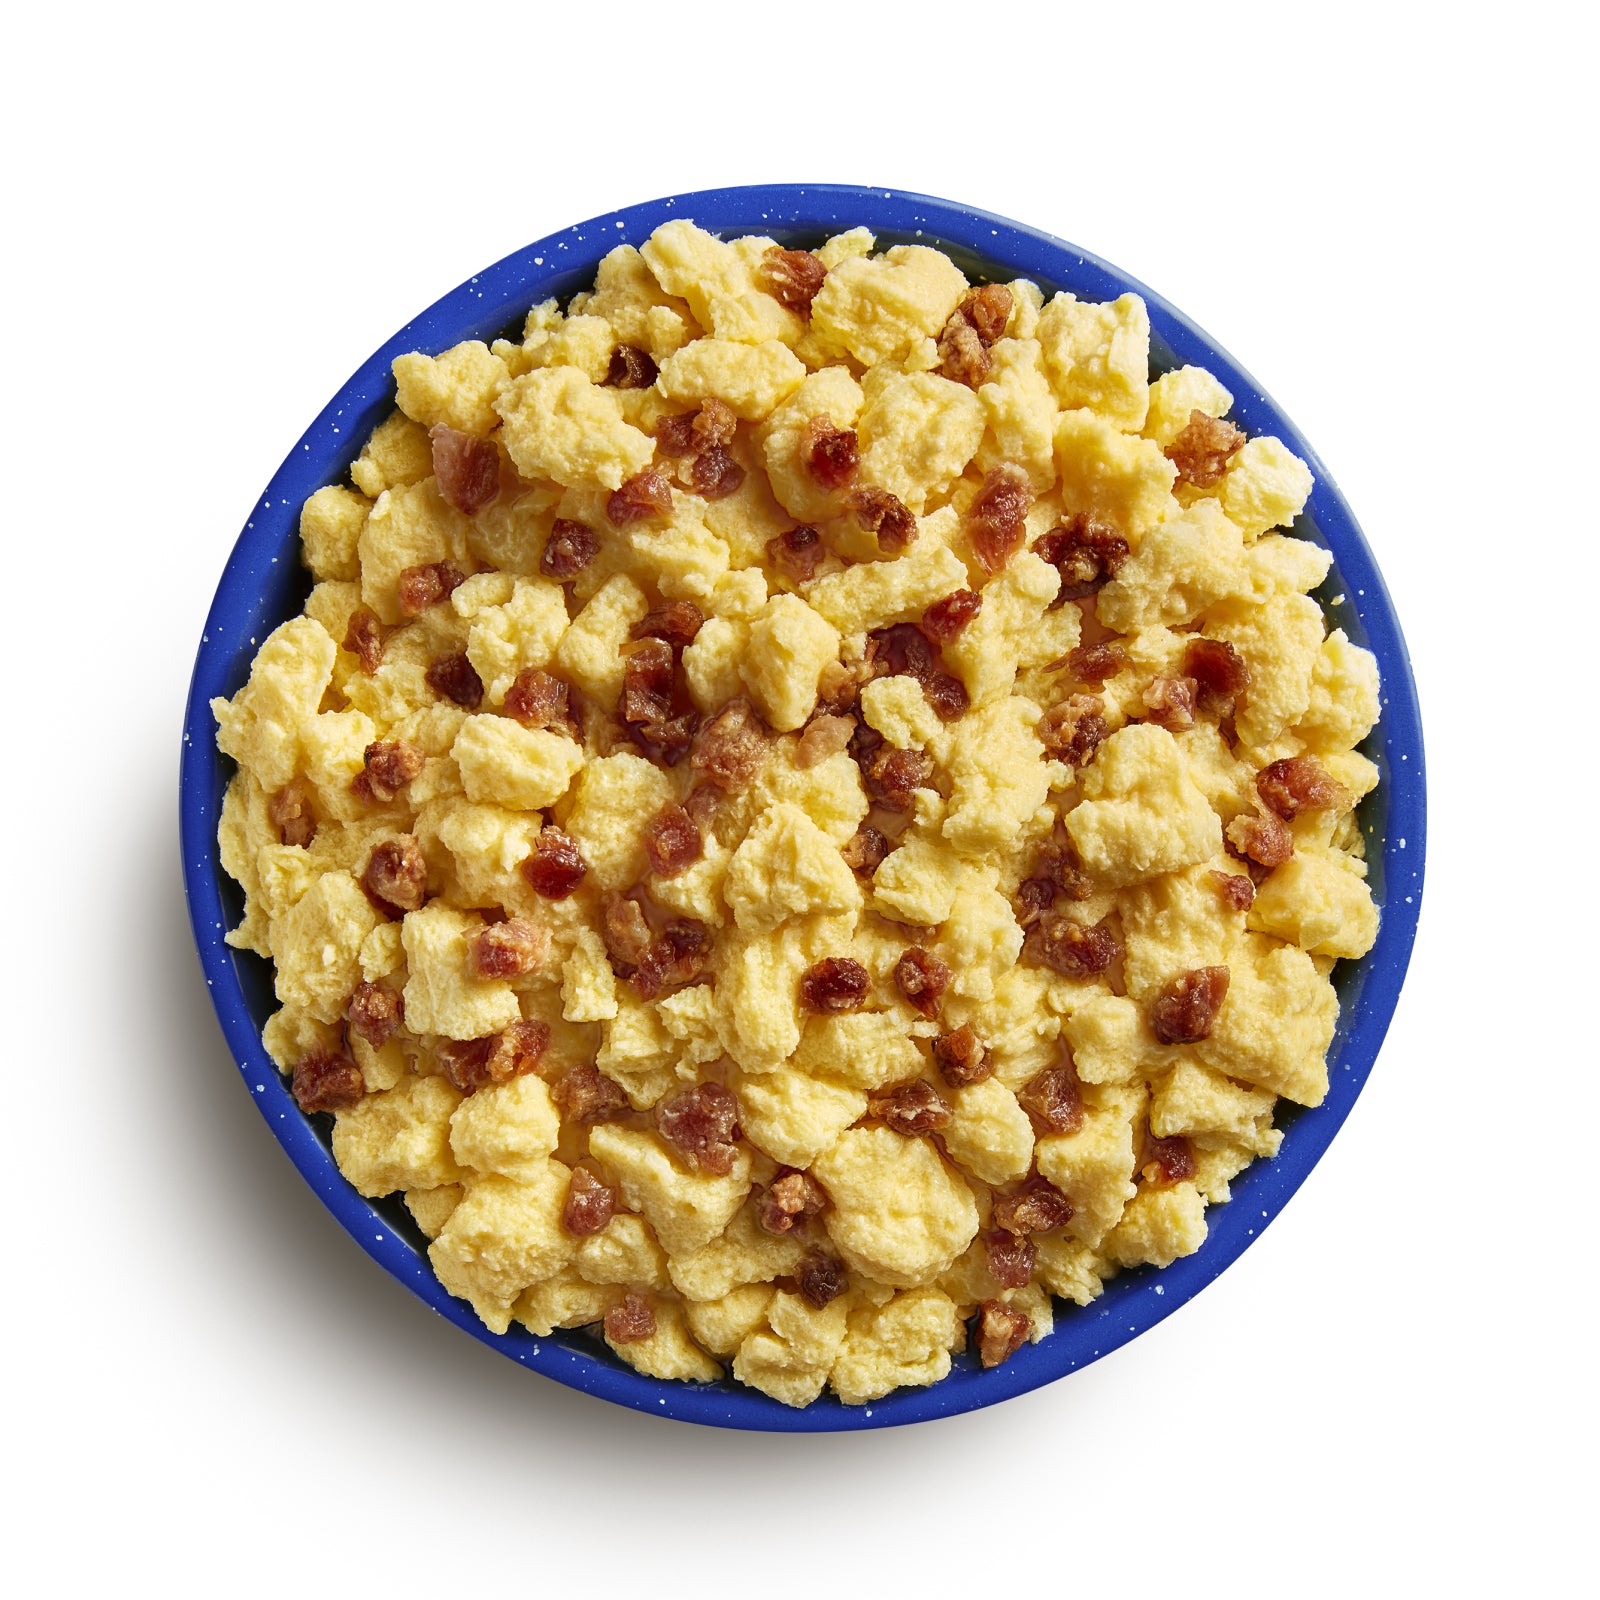 55457 Scrambled Eggs with Bacon Adventure Meal Prepared